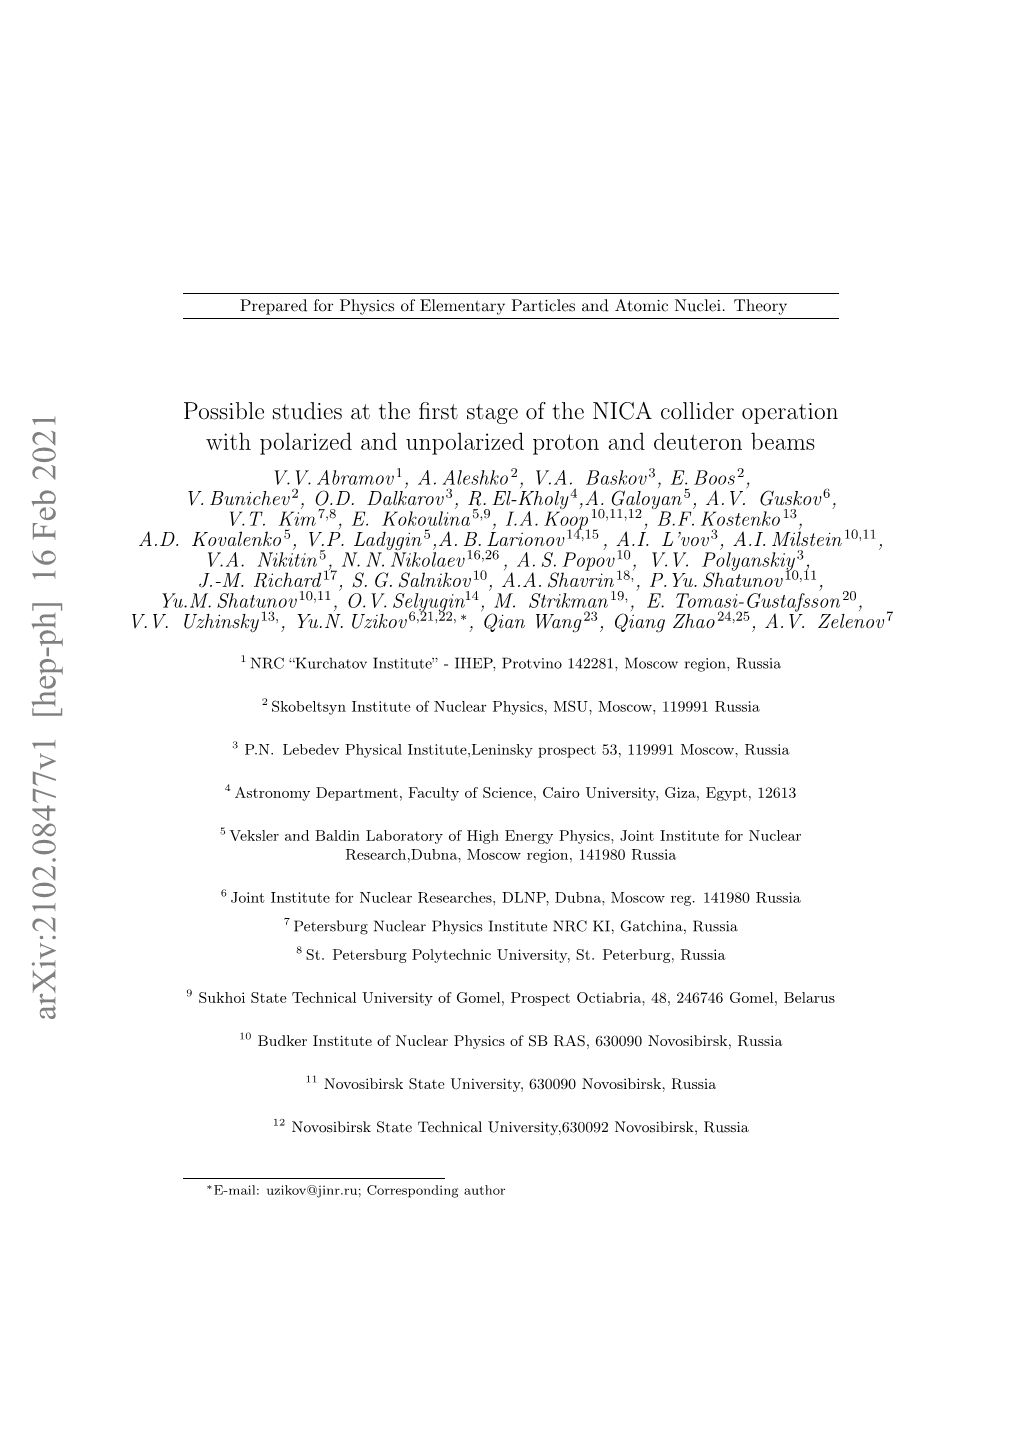 Possible Studies at the First Stage of the NICA Collider Operation With